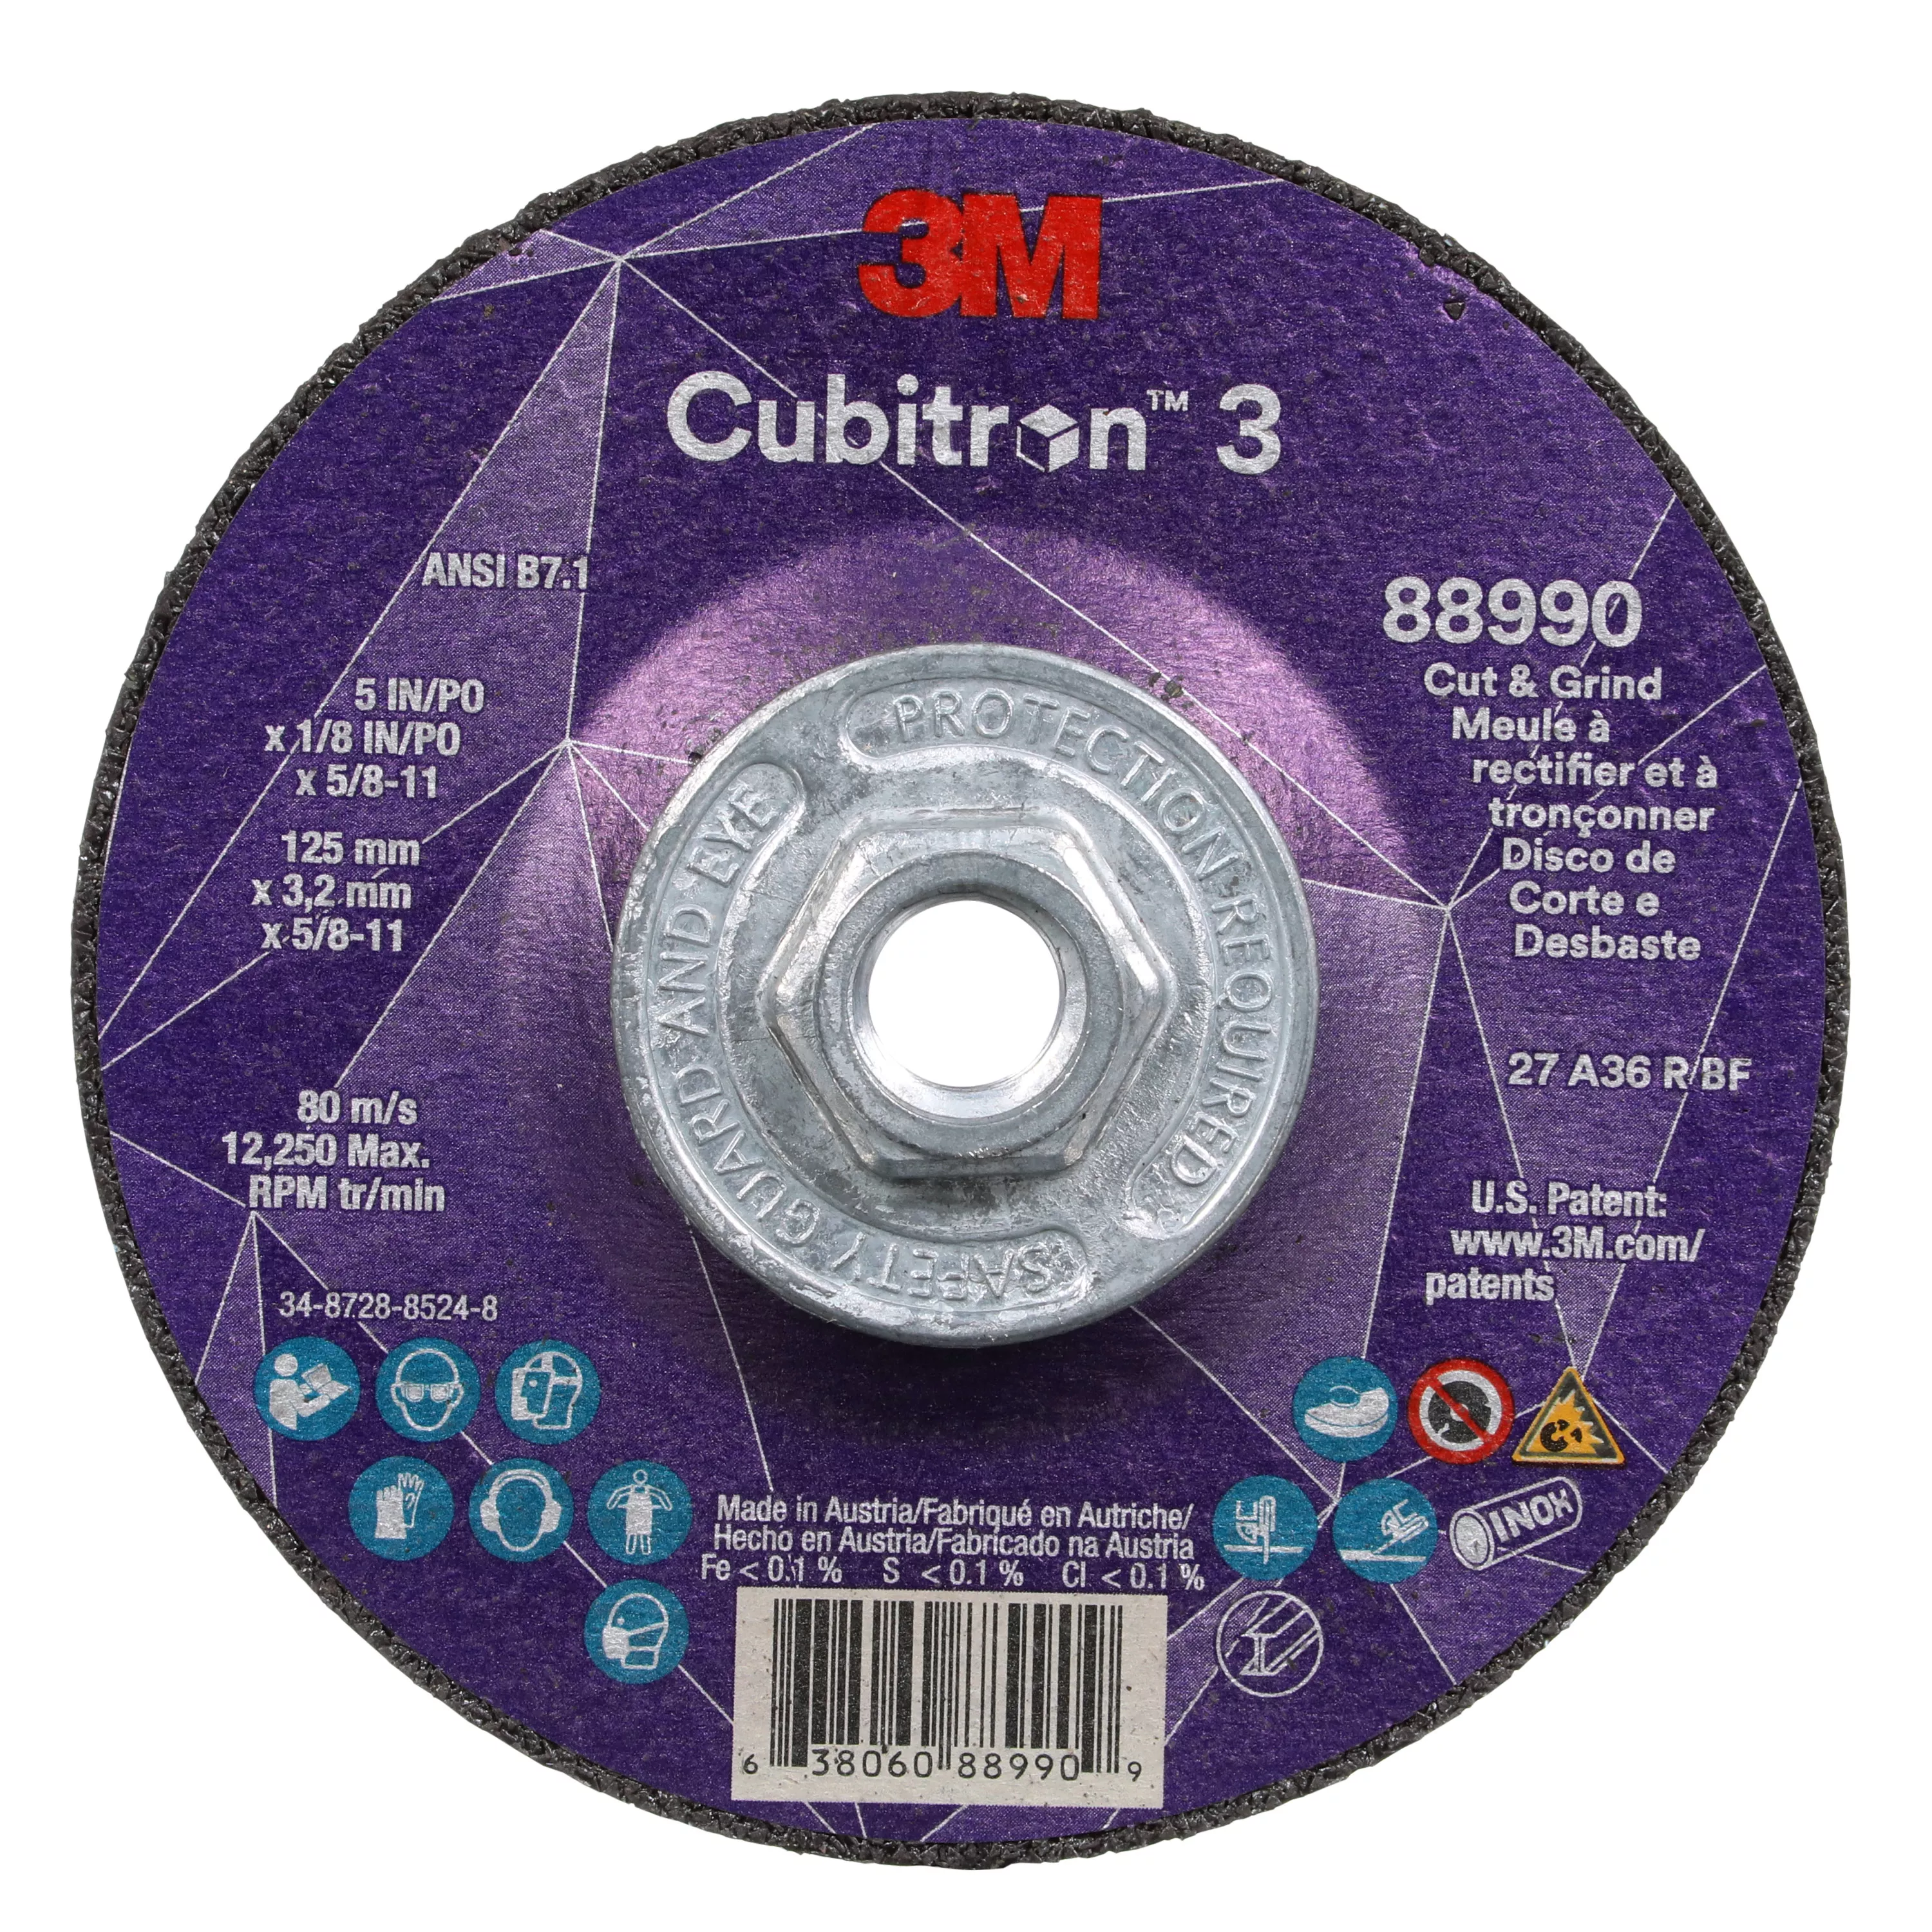 3M™ Cubitron™ 3 Cut and Grind Wheel, 88990, 36+, T27, 5 in x 1/8 in x
5/8 in-11 (125 x 3.2 mm x 5/8-11 in), ANSI, 10 ea/Case